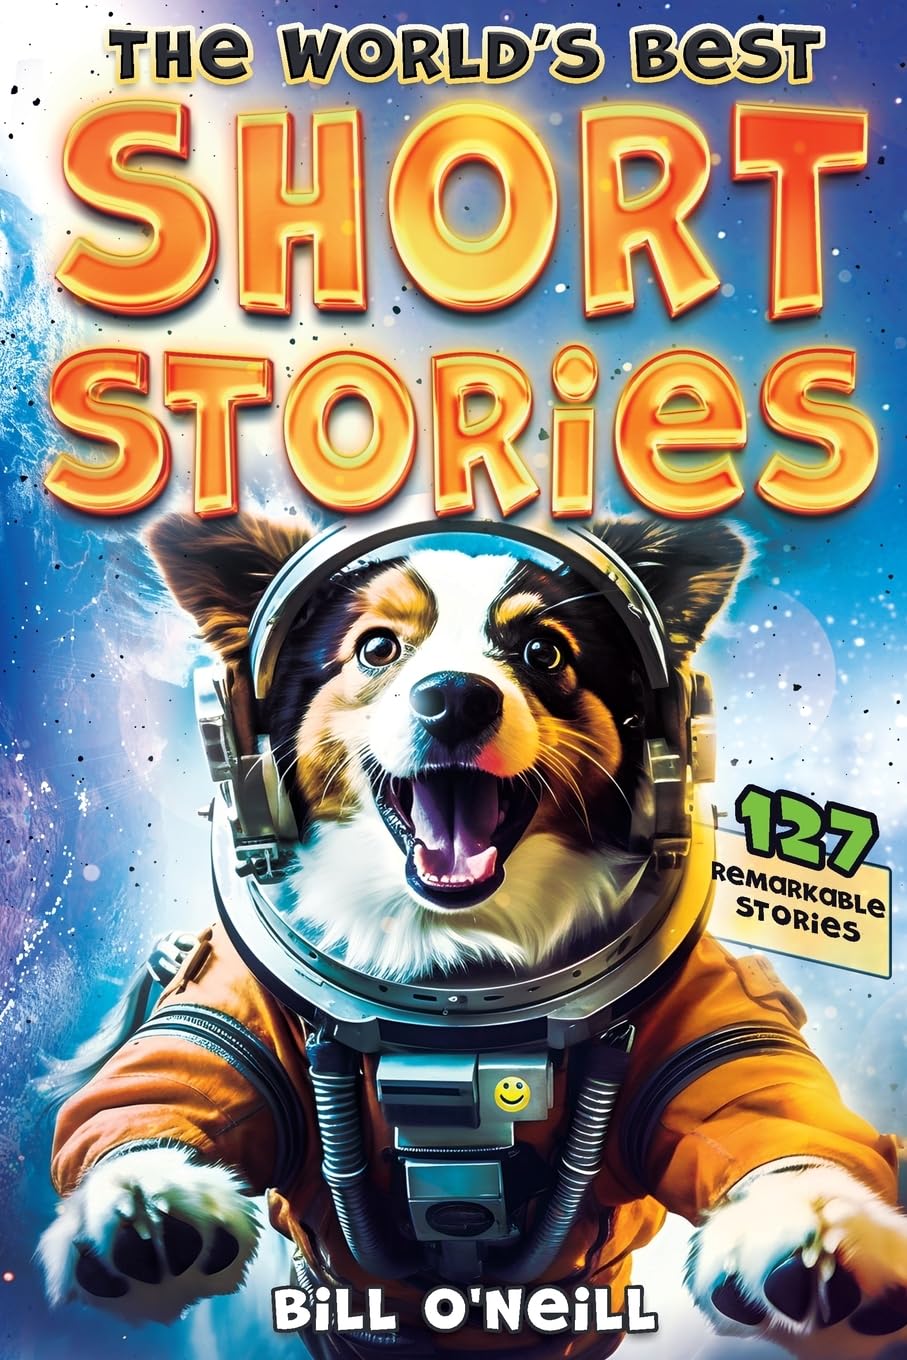 A dog wearing a space suit Description automatically generated